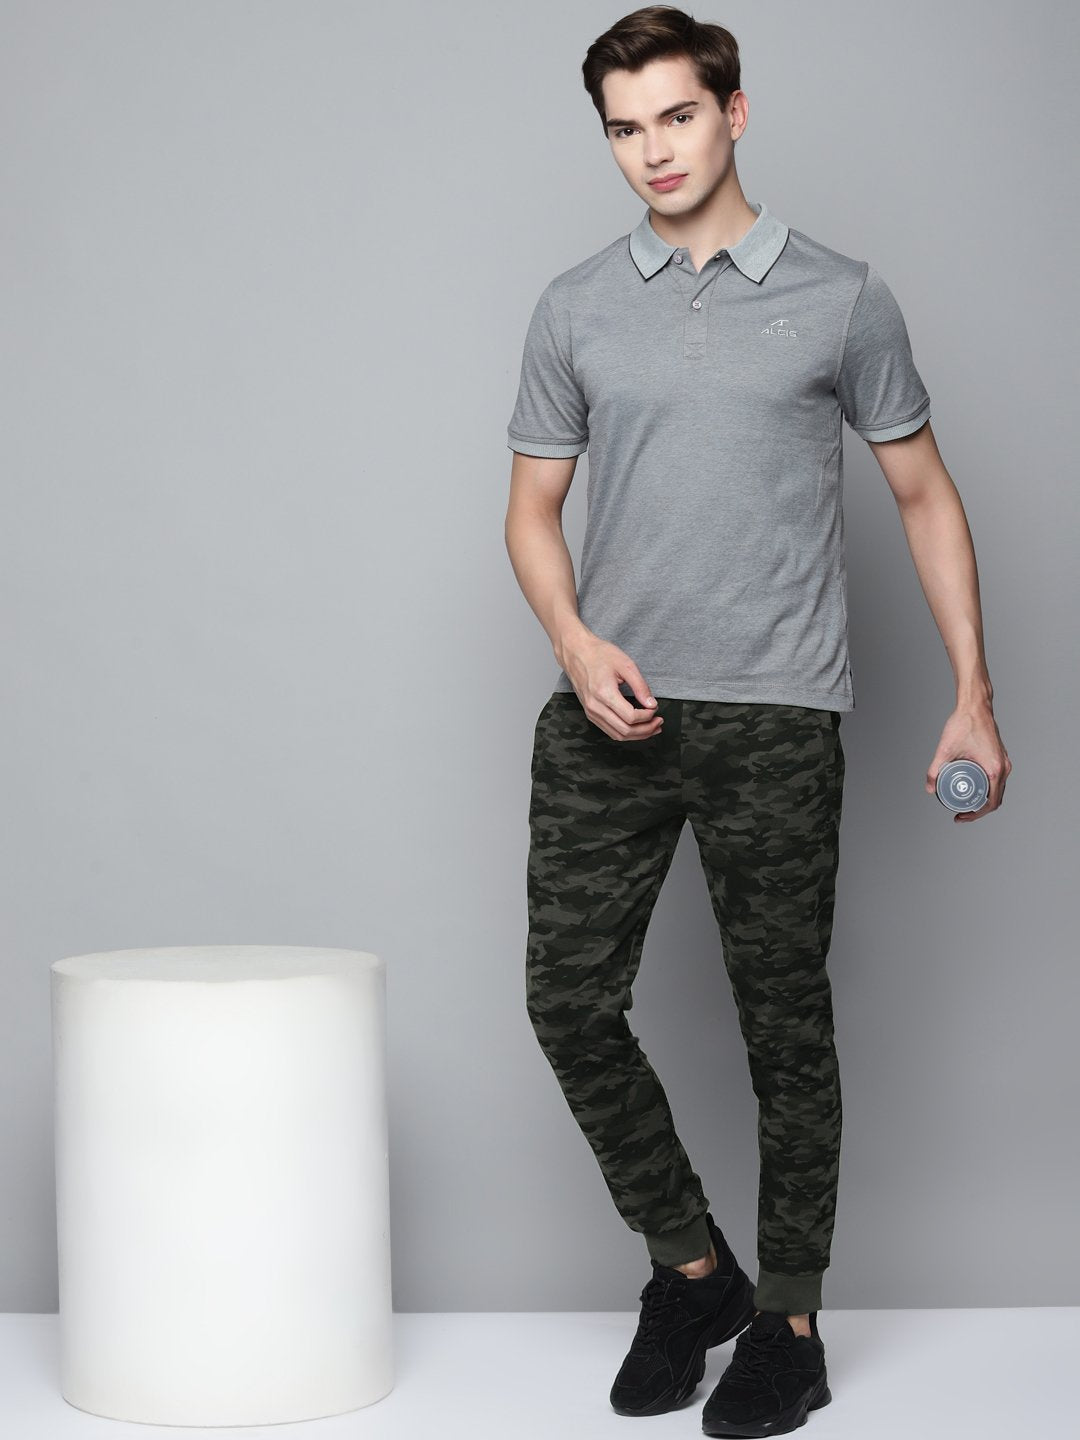 Alcis Men Olive Green Camouflage Printed Joggers